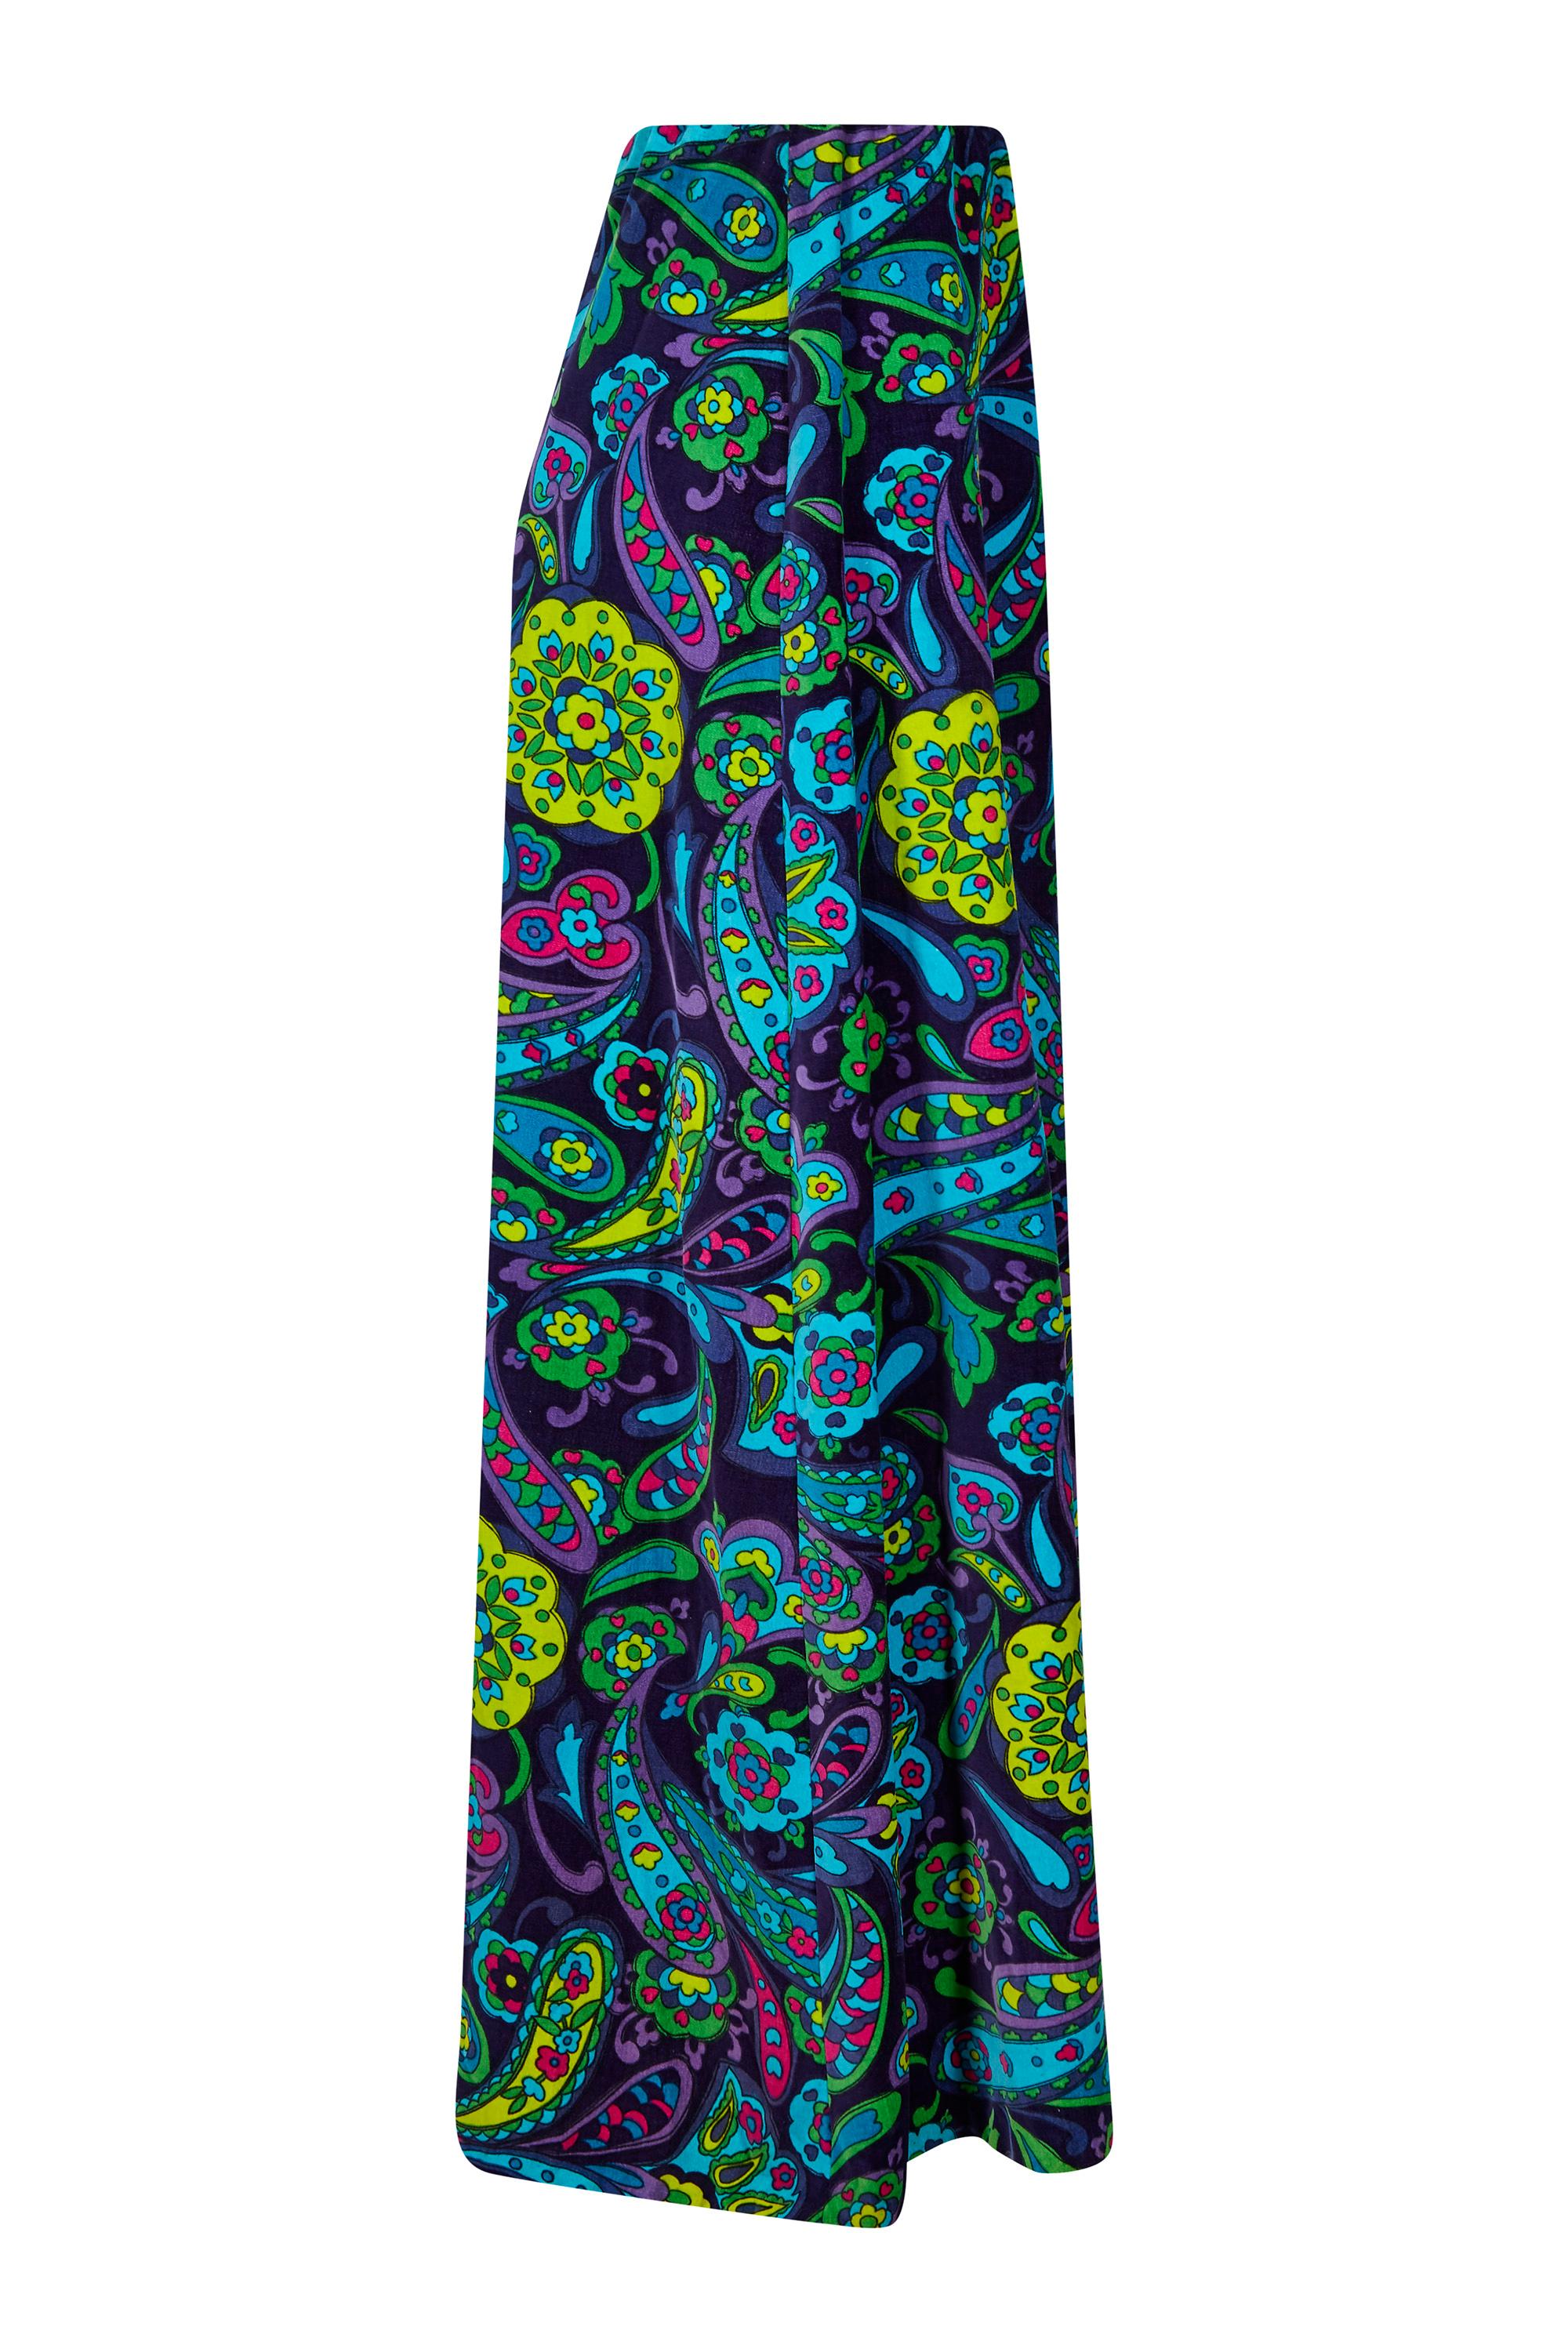 1960s Psychedelic Paisley Print Velvet Maxi Skirt and Top Ensemble For ...